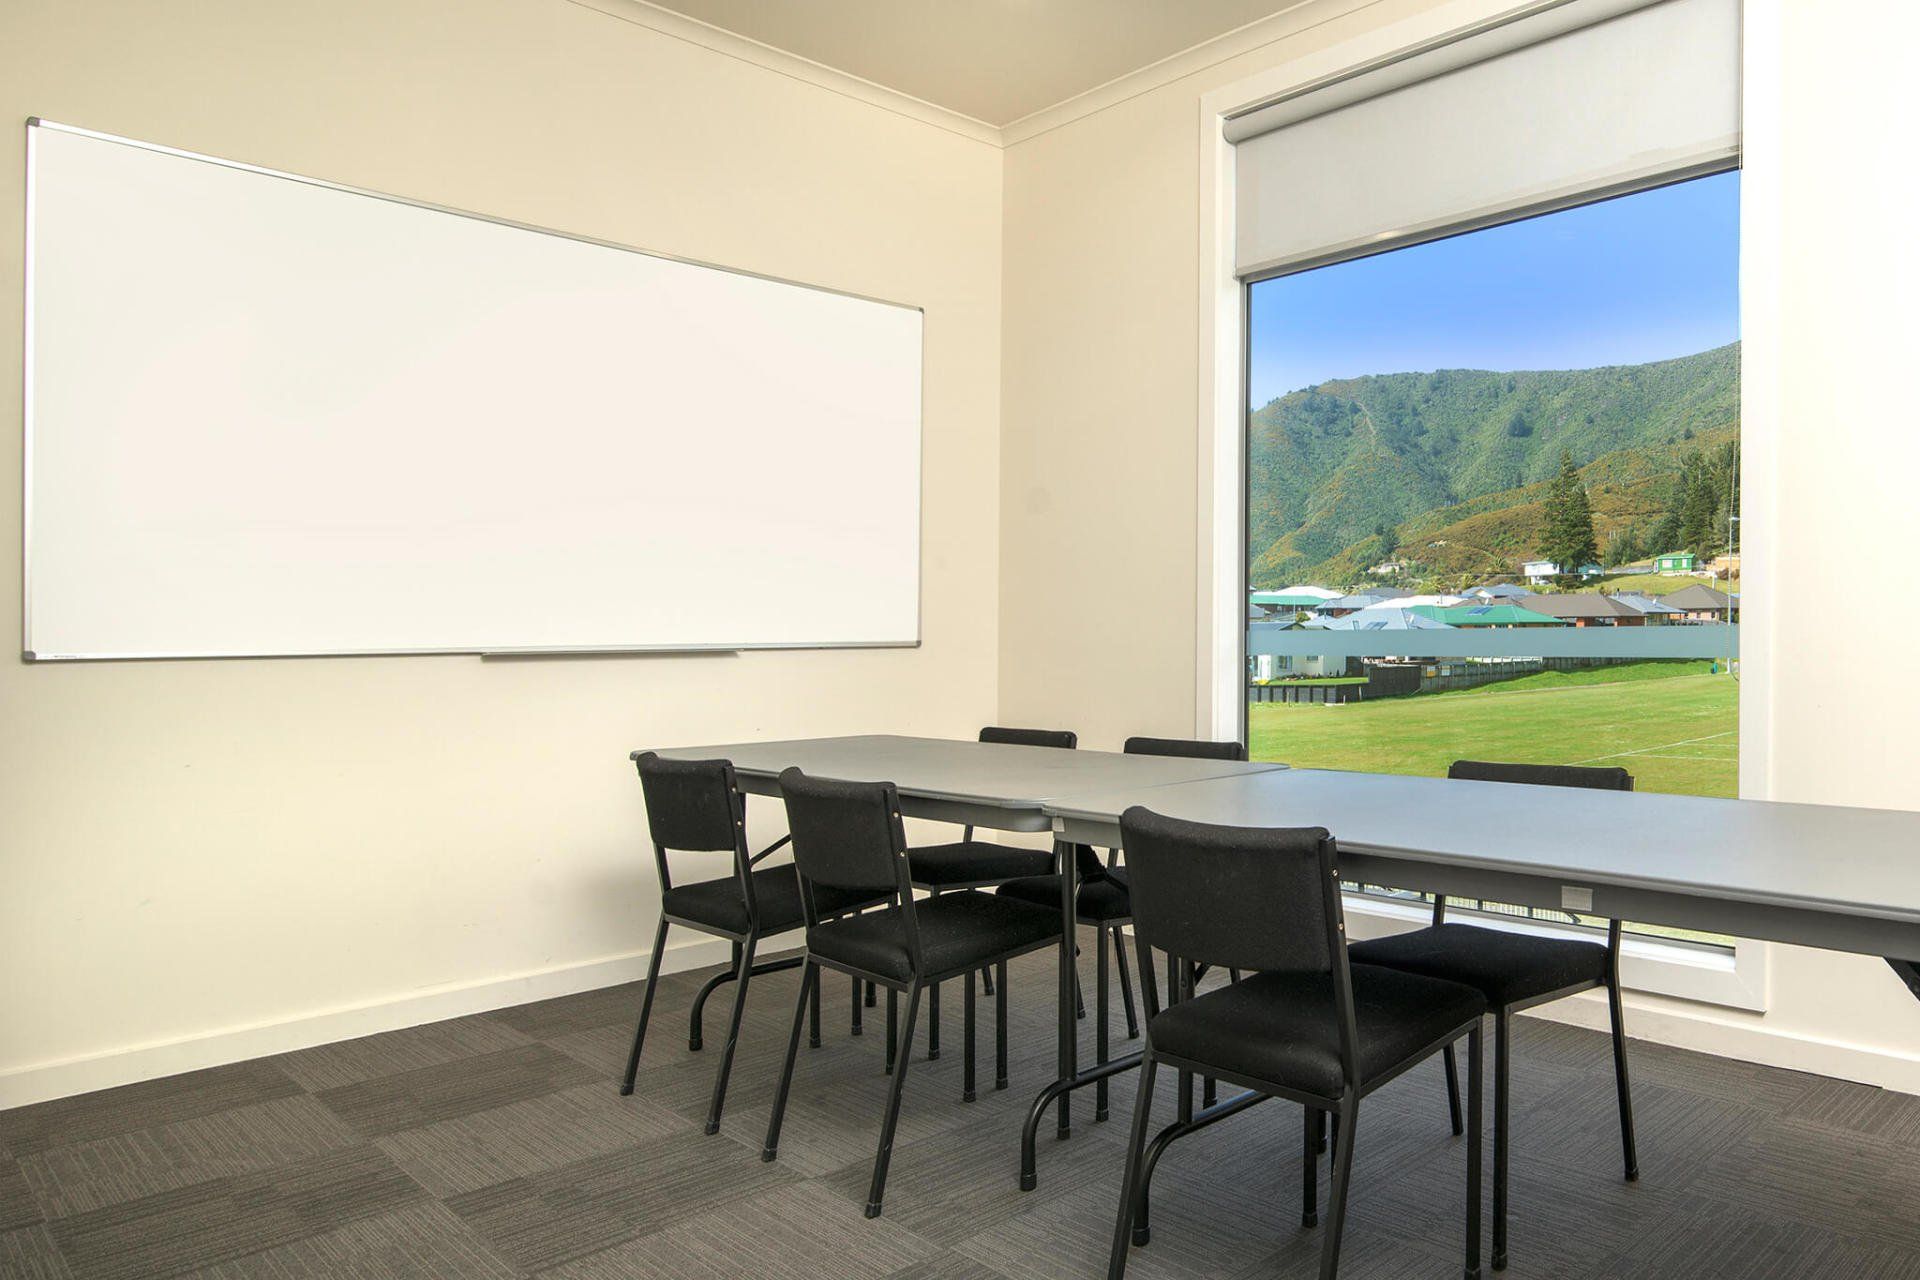 The Lions Club Boardroom at Endeavour Park Pavilion in Picton